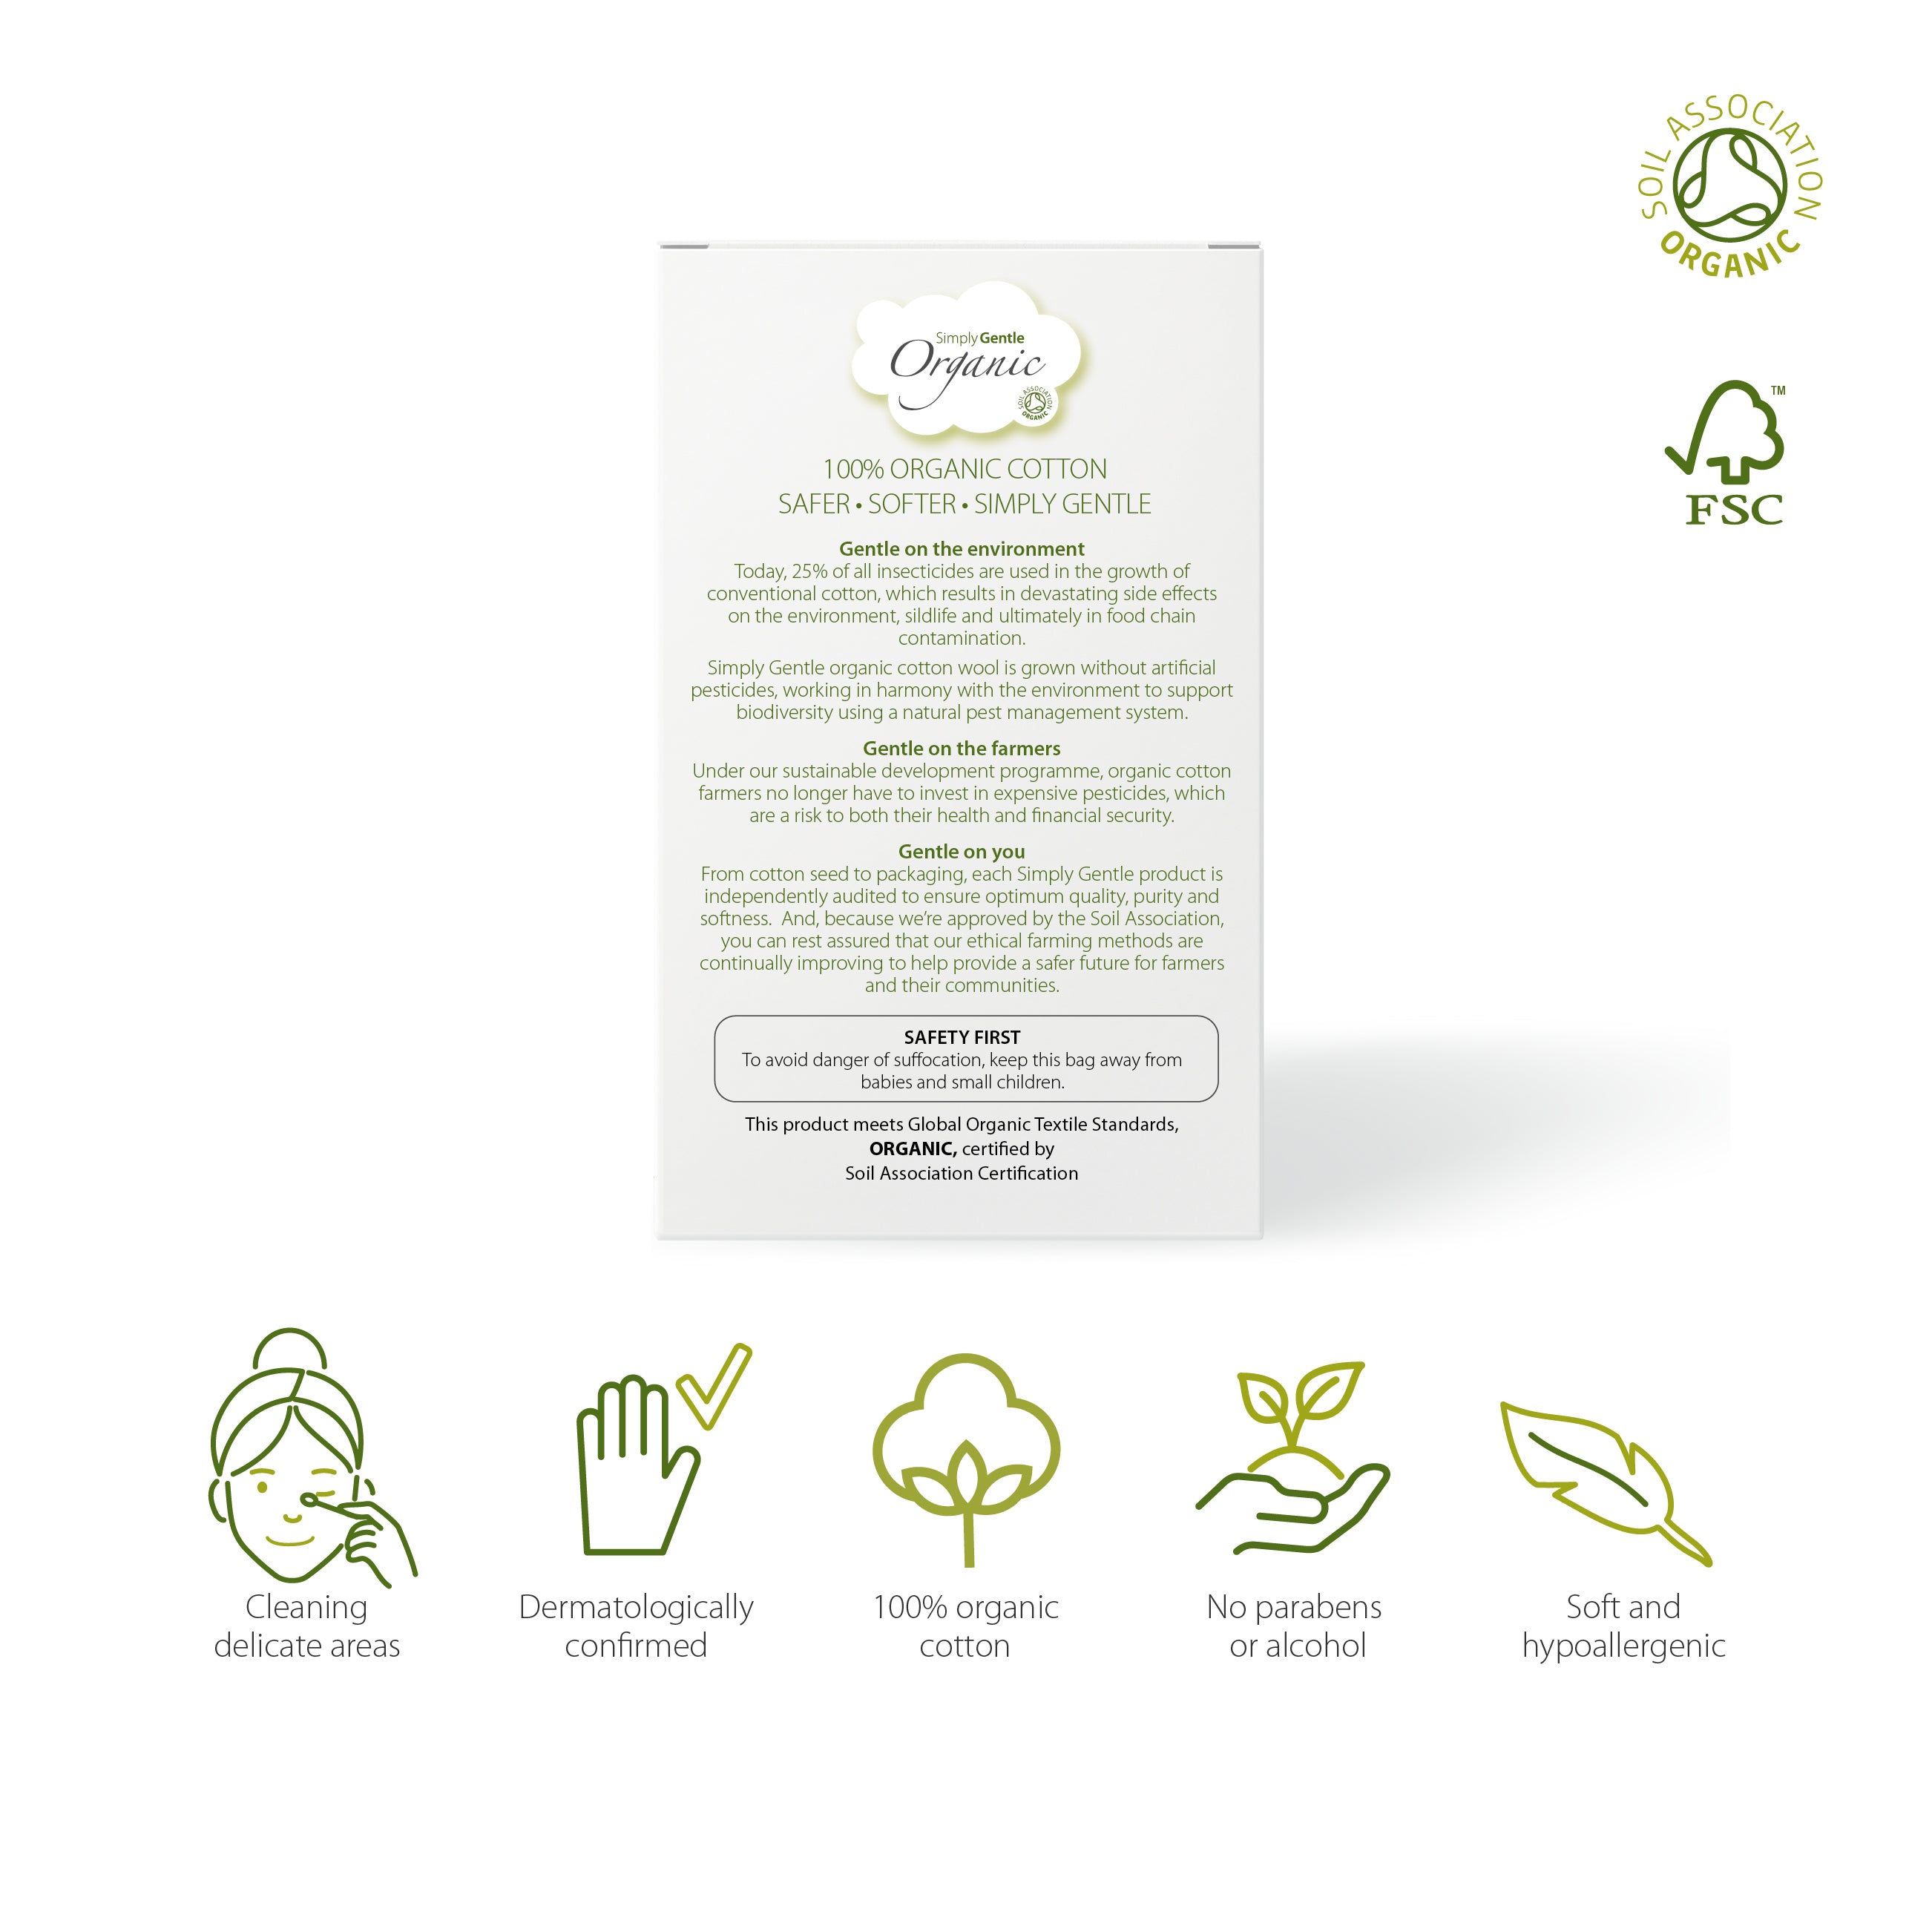 Simply Gentle Organic Paper Stem Buds have 100% organic cotton wool tips and FSC approved paper stems. Ideal for cleaning delicate areas around eyes and outer ear a versatile item of hygiene around the home. They are packed in a biodegradable box with an easy to use dispenser. 100% certified organic cotton wool. Soil Association approved. 